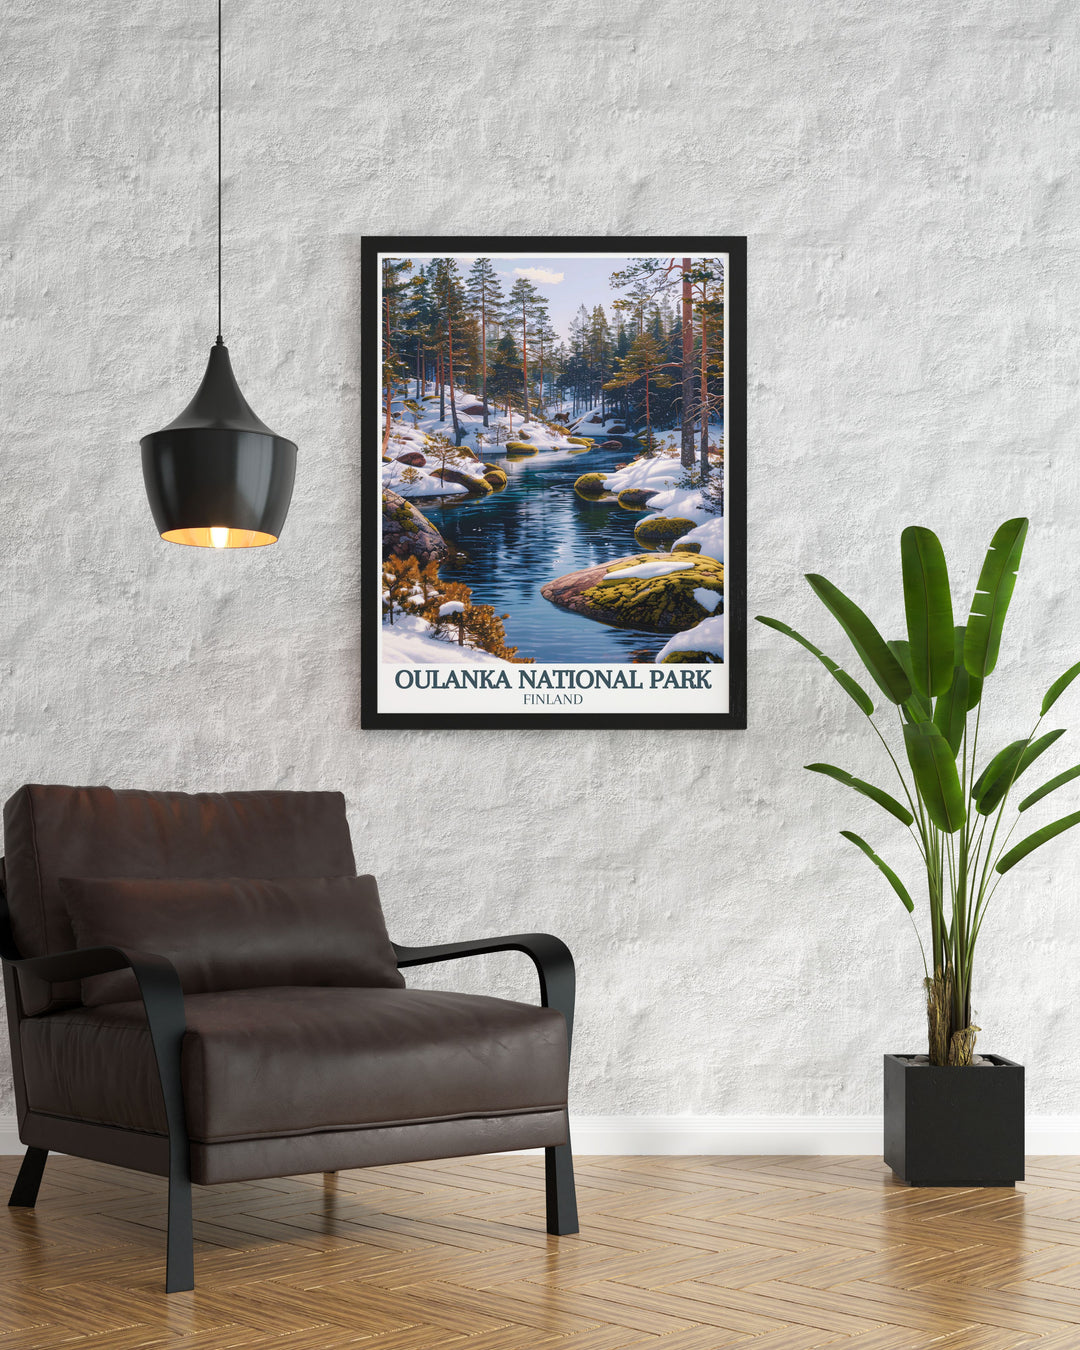 Celebrate the majestic Oulanka River and Kiutakongas Rapids with this beautifully crafted print. The artwork brings to life the rushing waters and lush greenery of Finlands wilderness, making it an ideal piece for any nature themed decor or as a thoughtful gift.